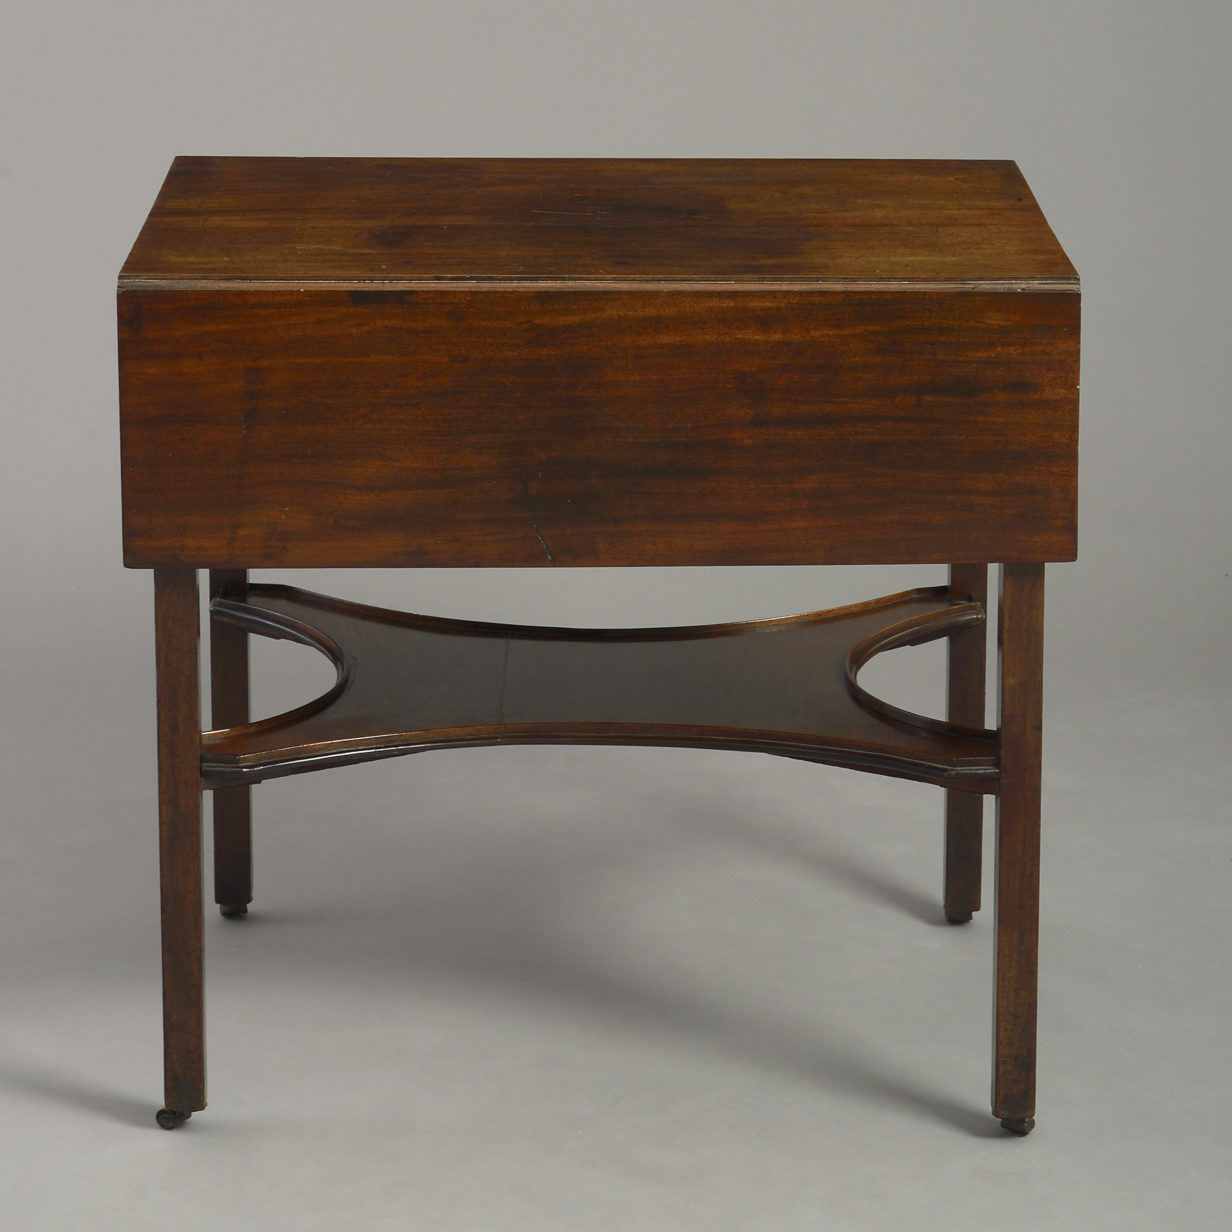 18th century george iii period mahogany supper table